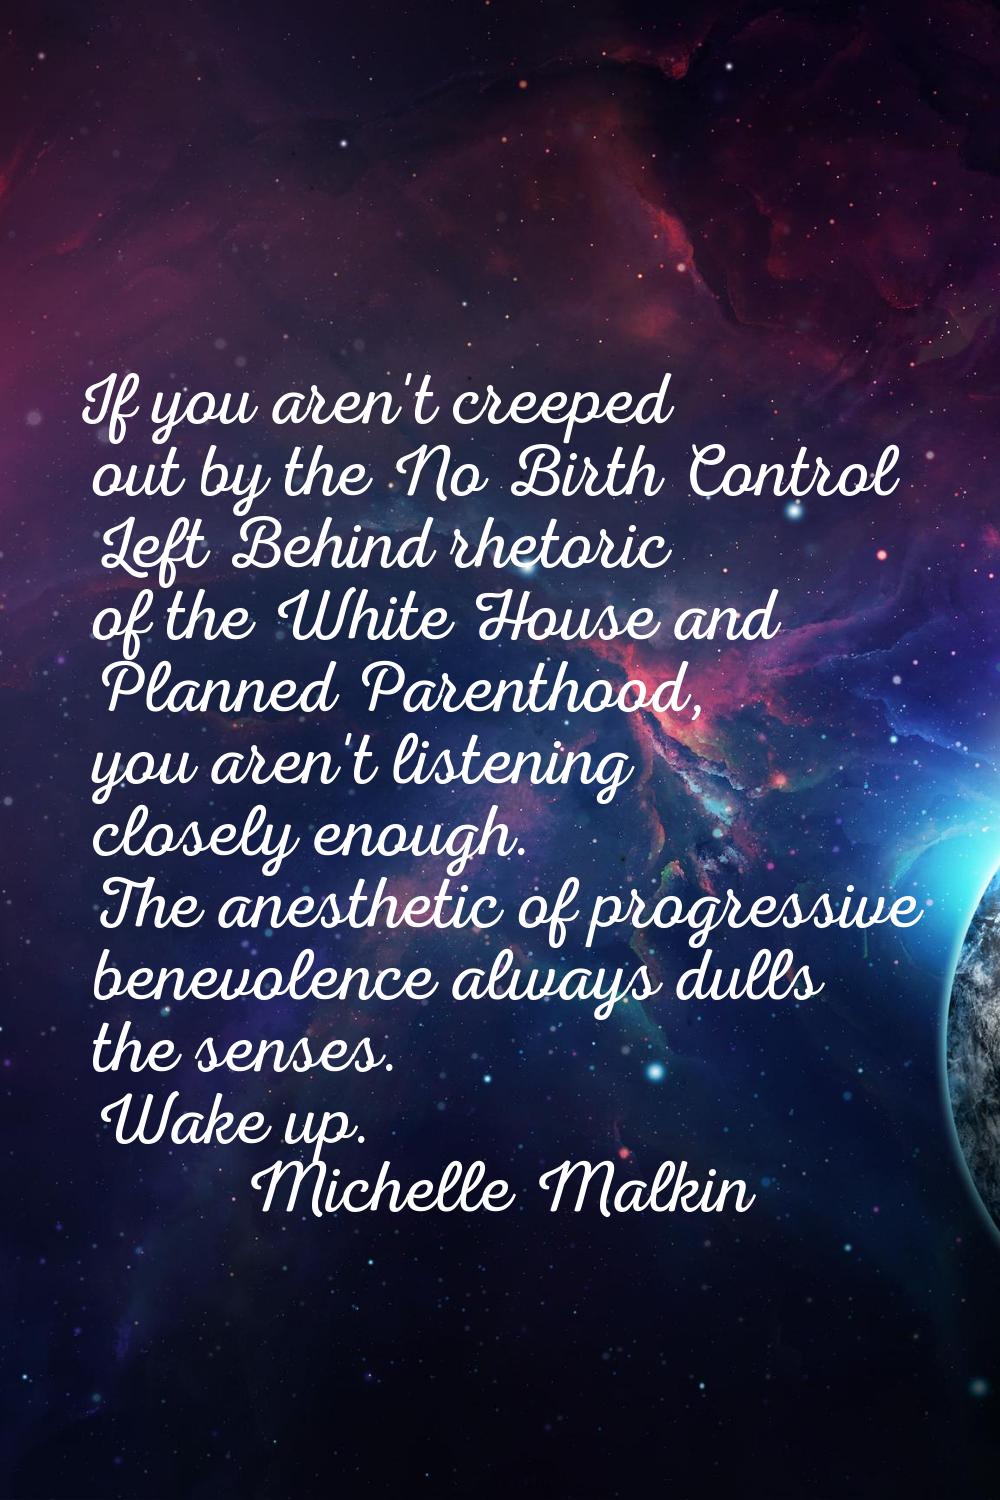 If you aren't creeped out by the No Birth Control Left Behind rhetoric of the White House and Plann